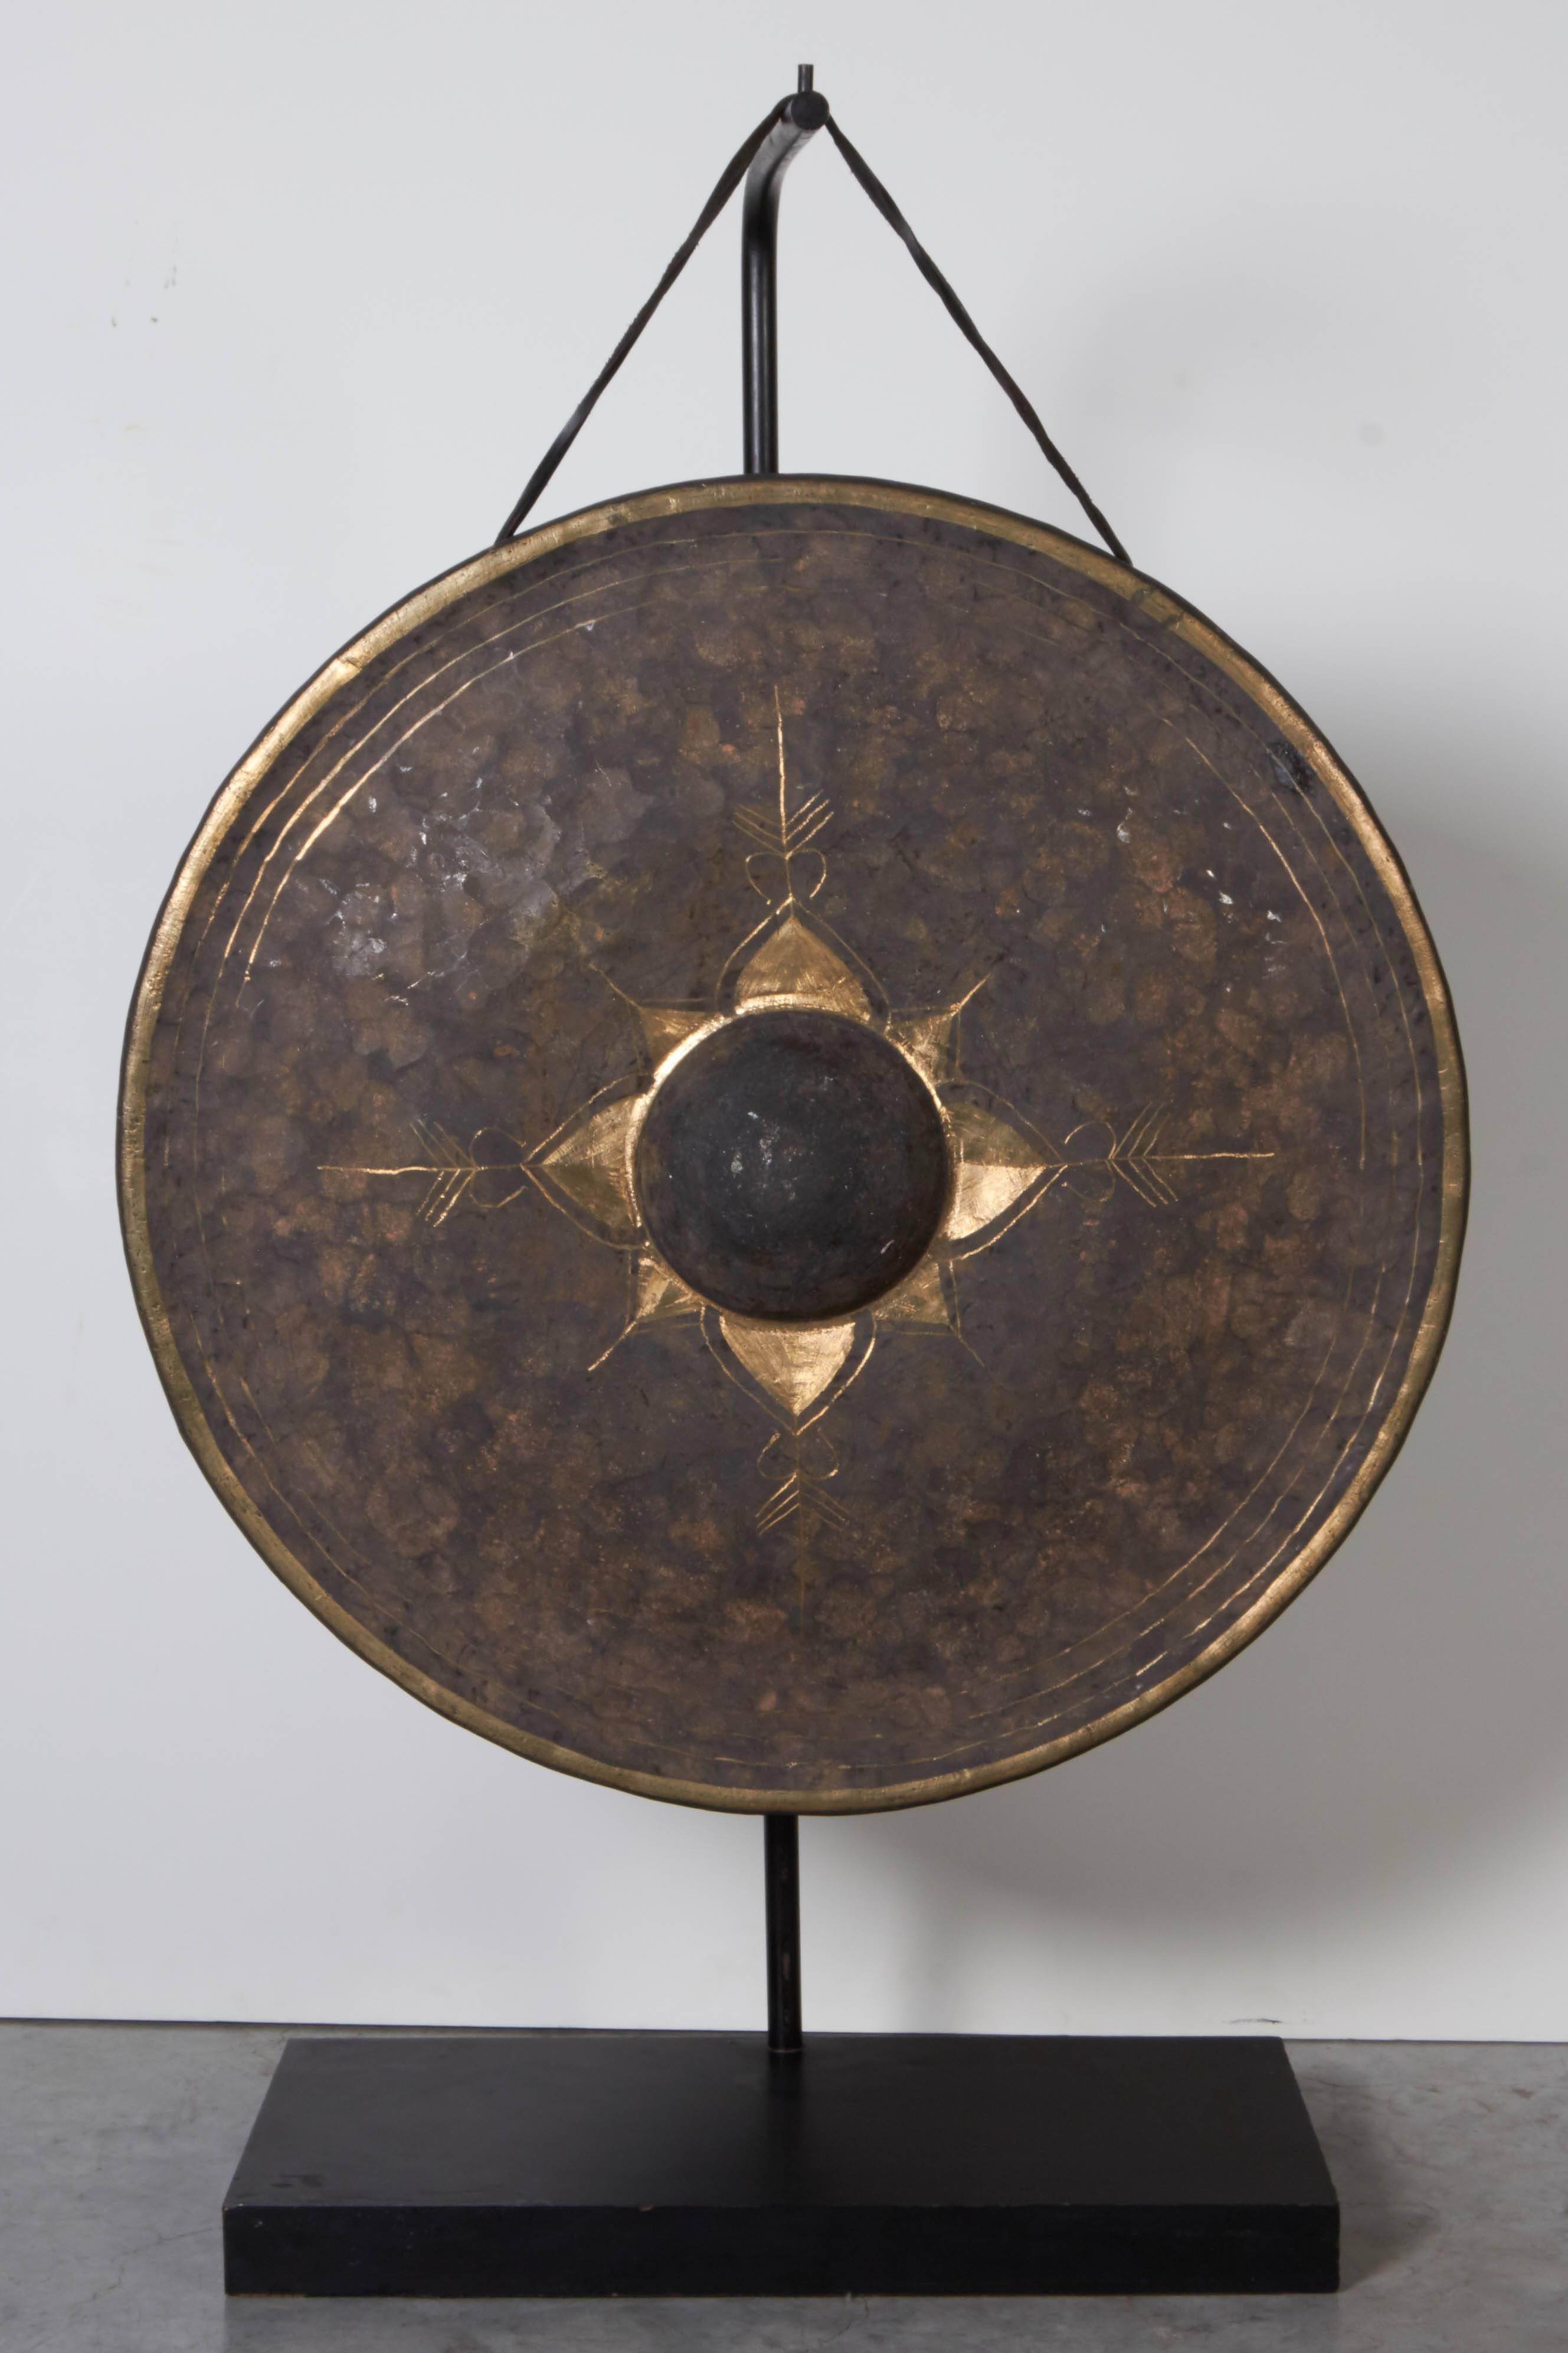 A late 19th century antique Burmese brass temple gong on a custom stand. This gong displays a beautiful patina and has a long lasting, calming and soothing sound. Includes mallet.
Dimensions on the stand: L 18, D 9, H 36. Dimensions of gong: Dia